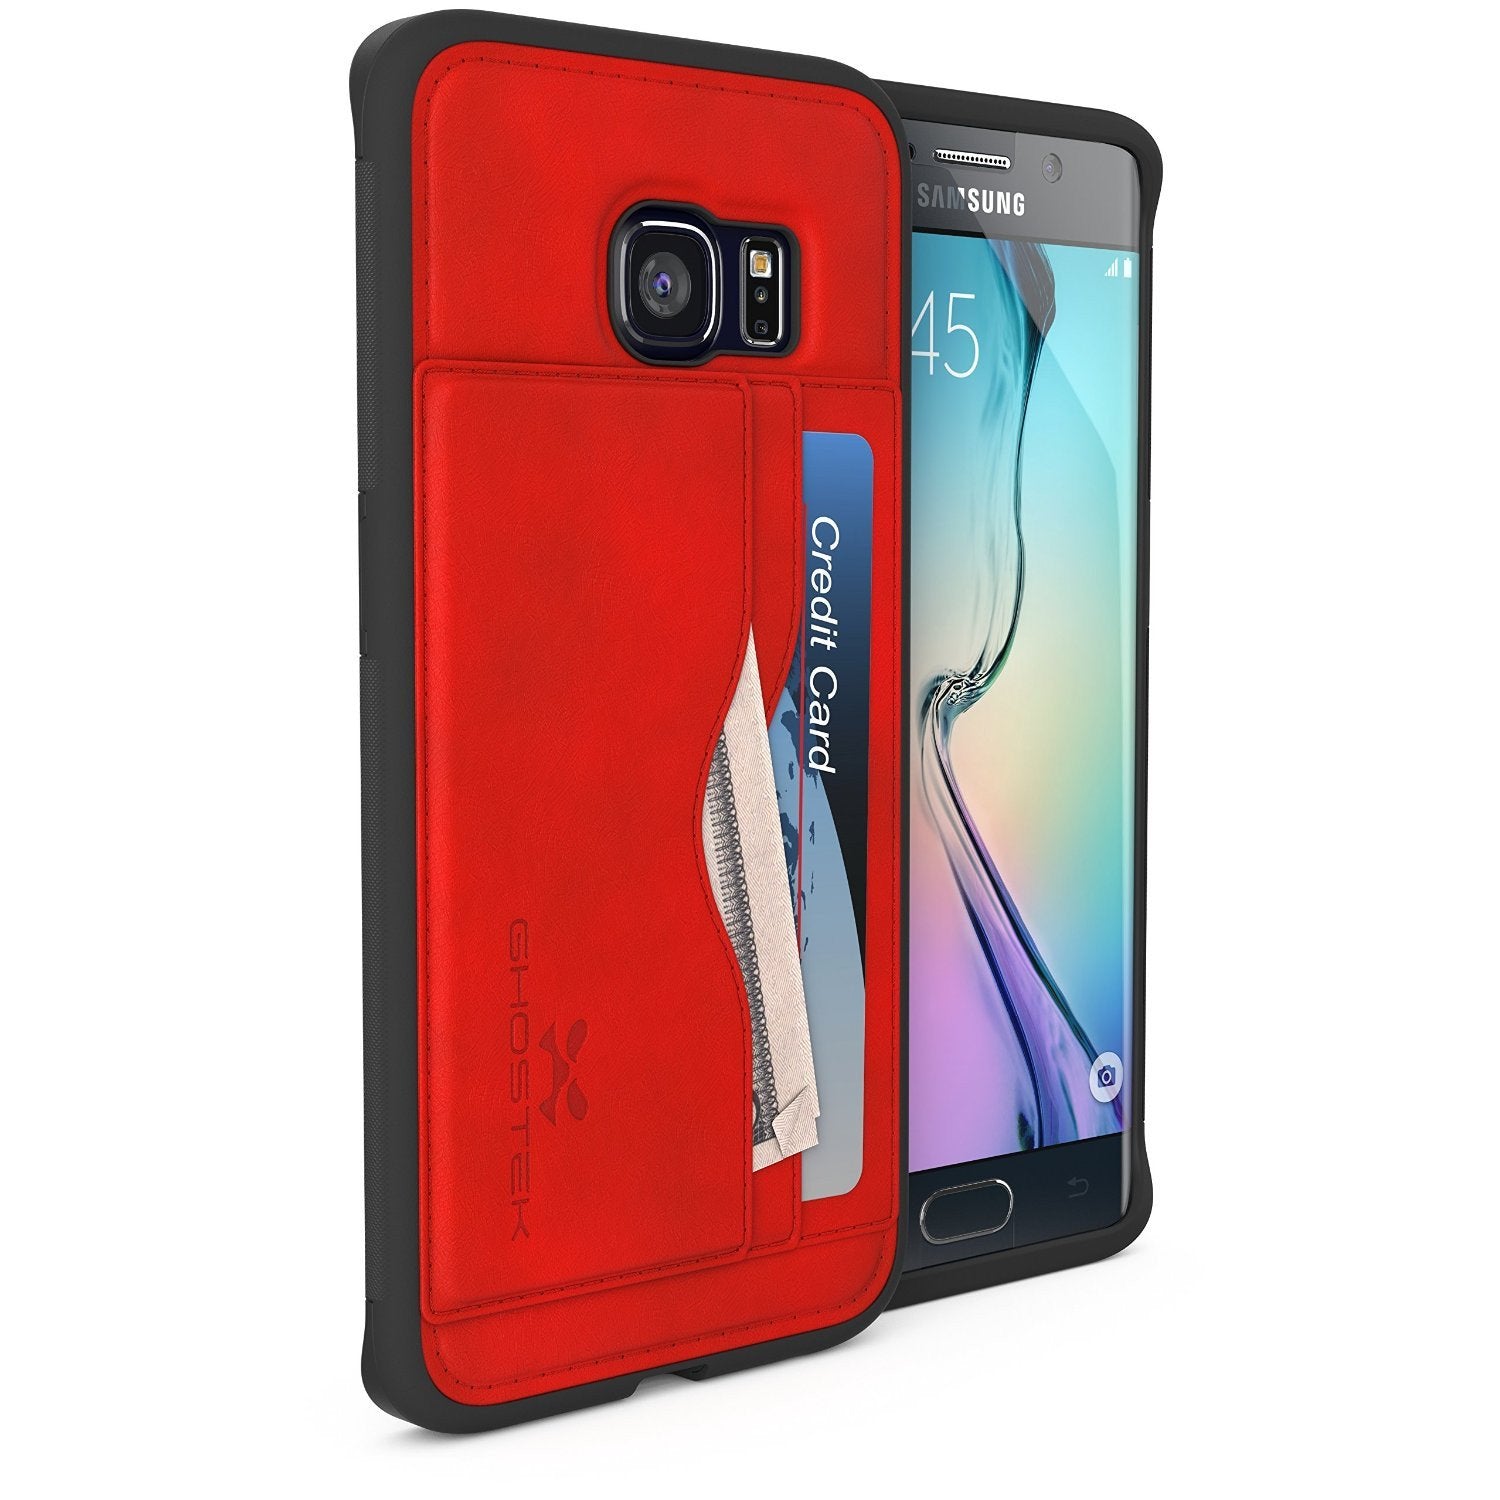 S6 Edge Wallet Case, Ghostek Stash Red | Wallet Case w/Screen Protector | Premium Soft PU Leather